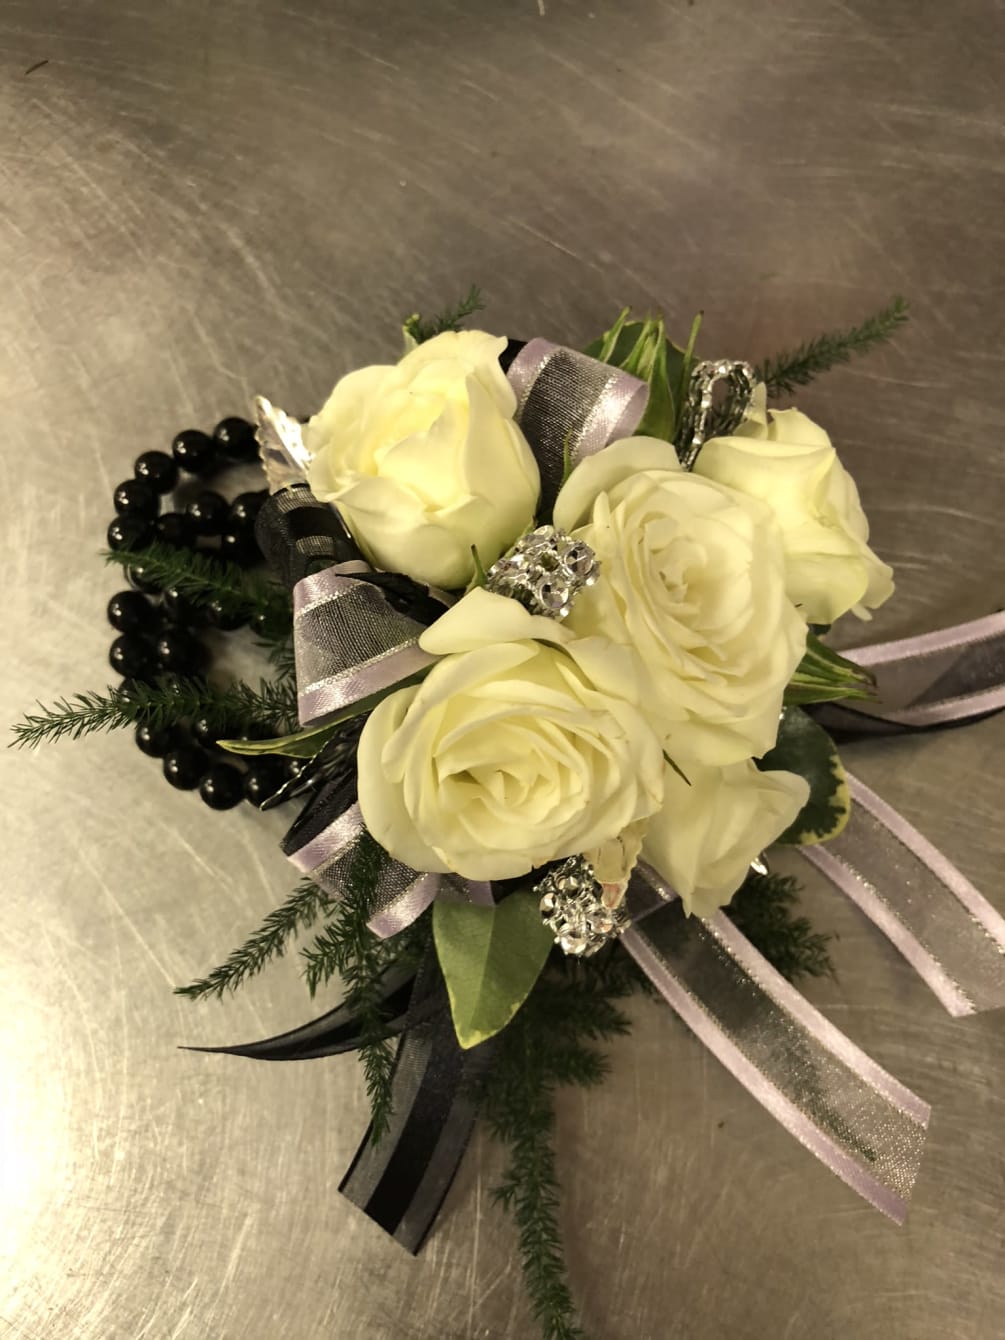 Our corsages are made to order, in the special instruction box let